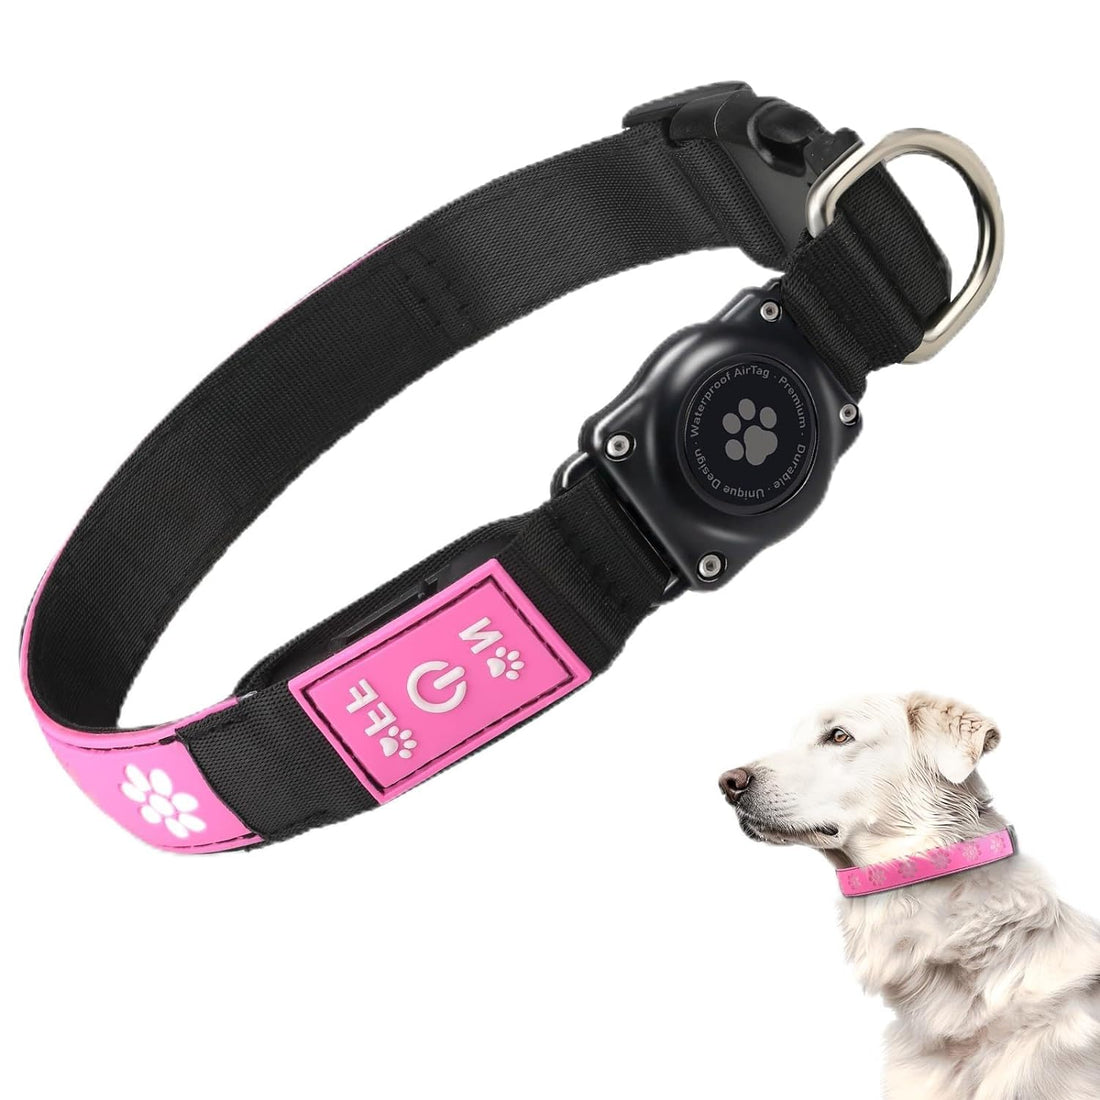 LED AirTag Dog Collar - Brightest Light Up Dog Collars - IP67 Waterproof Air Tag Dog Collar Holder - 1,600 Feet of High Visibility - USB C Rechargeable - Dog Lights for Night Walking